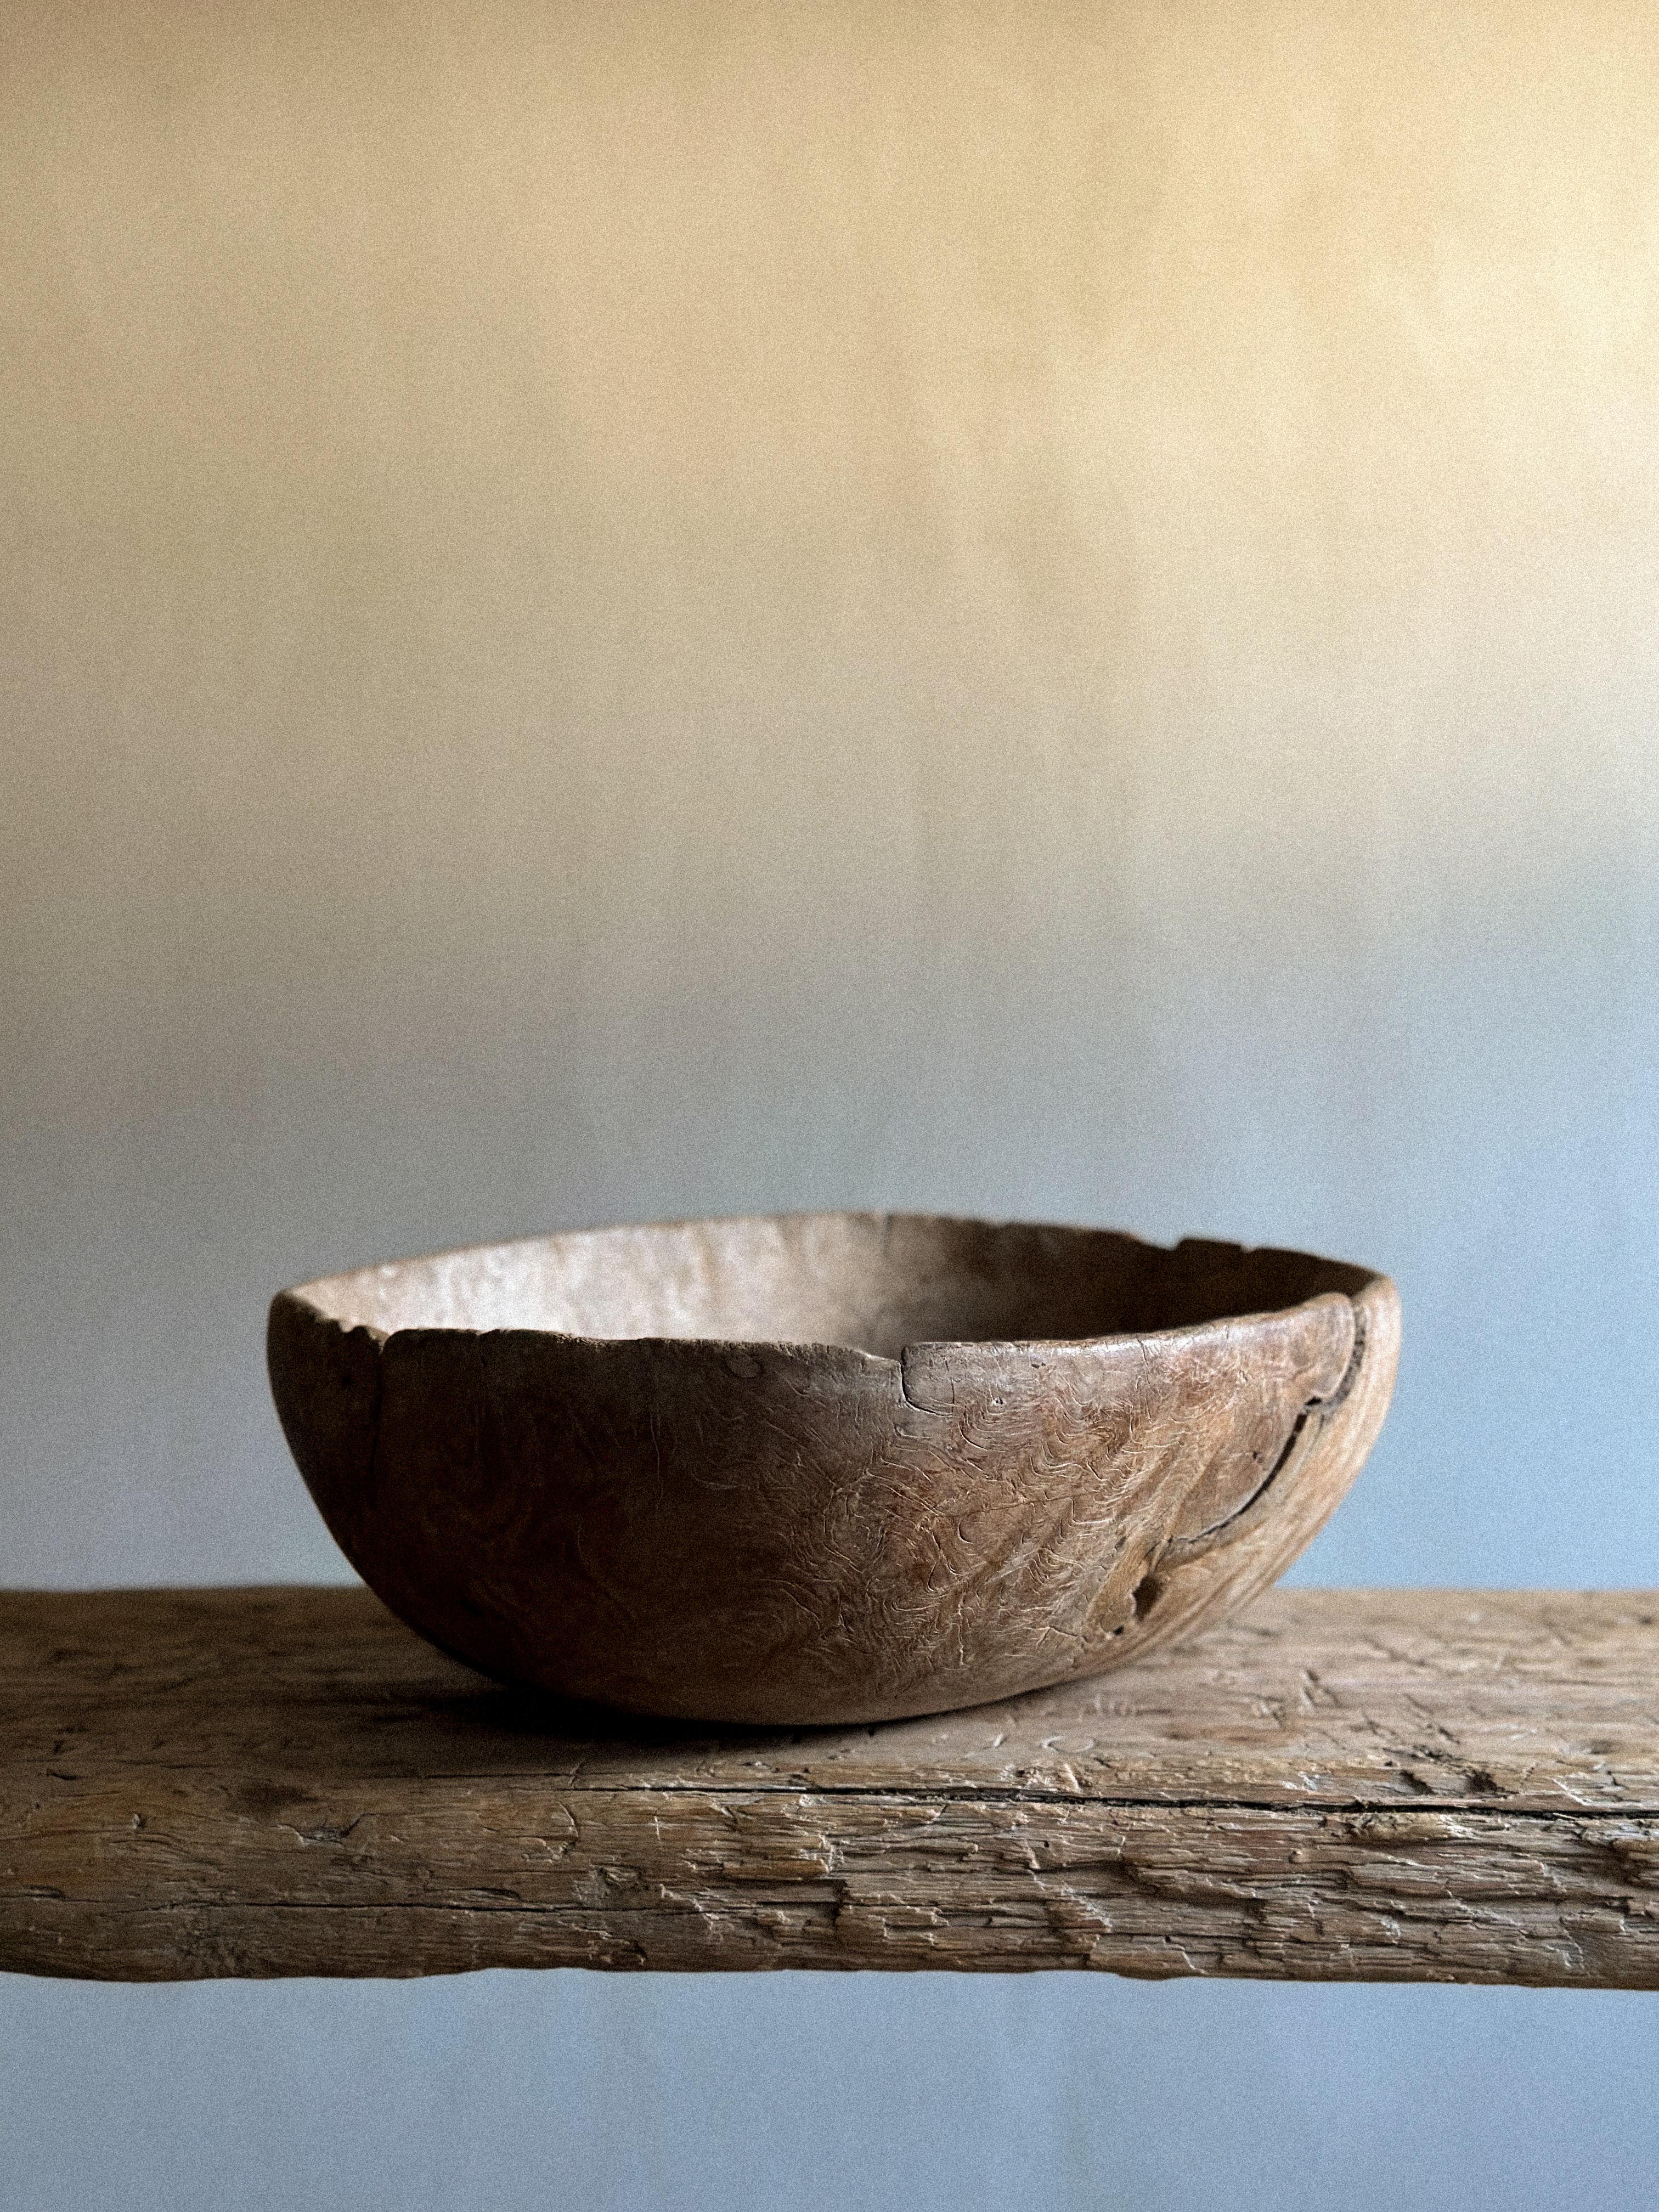 Wooden Wabi Sabi Root bowl from Scandinavia, circa 1800s. In good vintage condition showing beautiful patina from age and use.